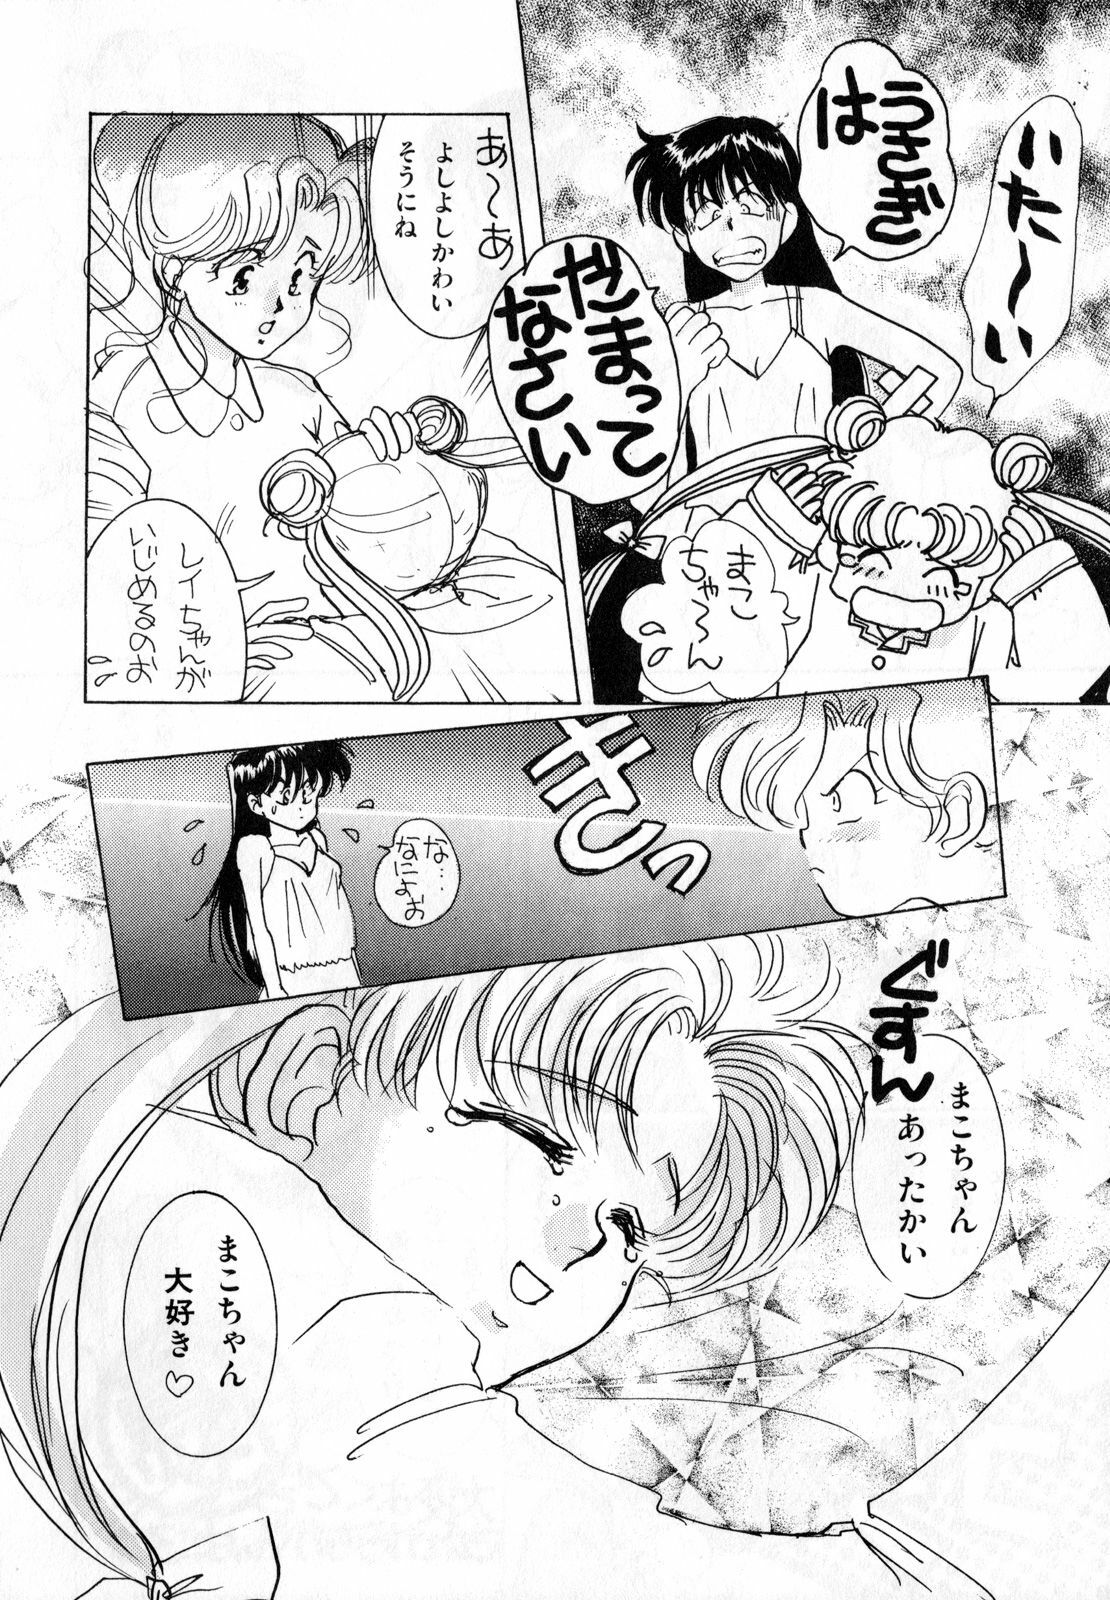 [Anthology] Lunatic Party 1 (Sailor Moon) page 33 full